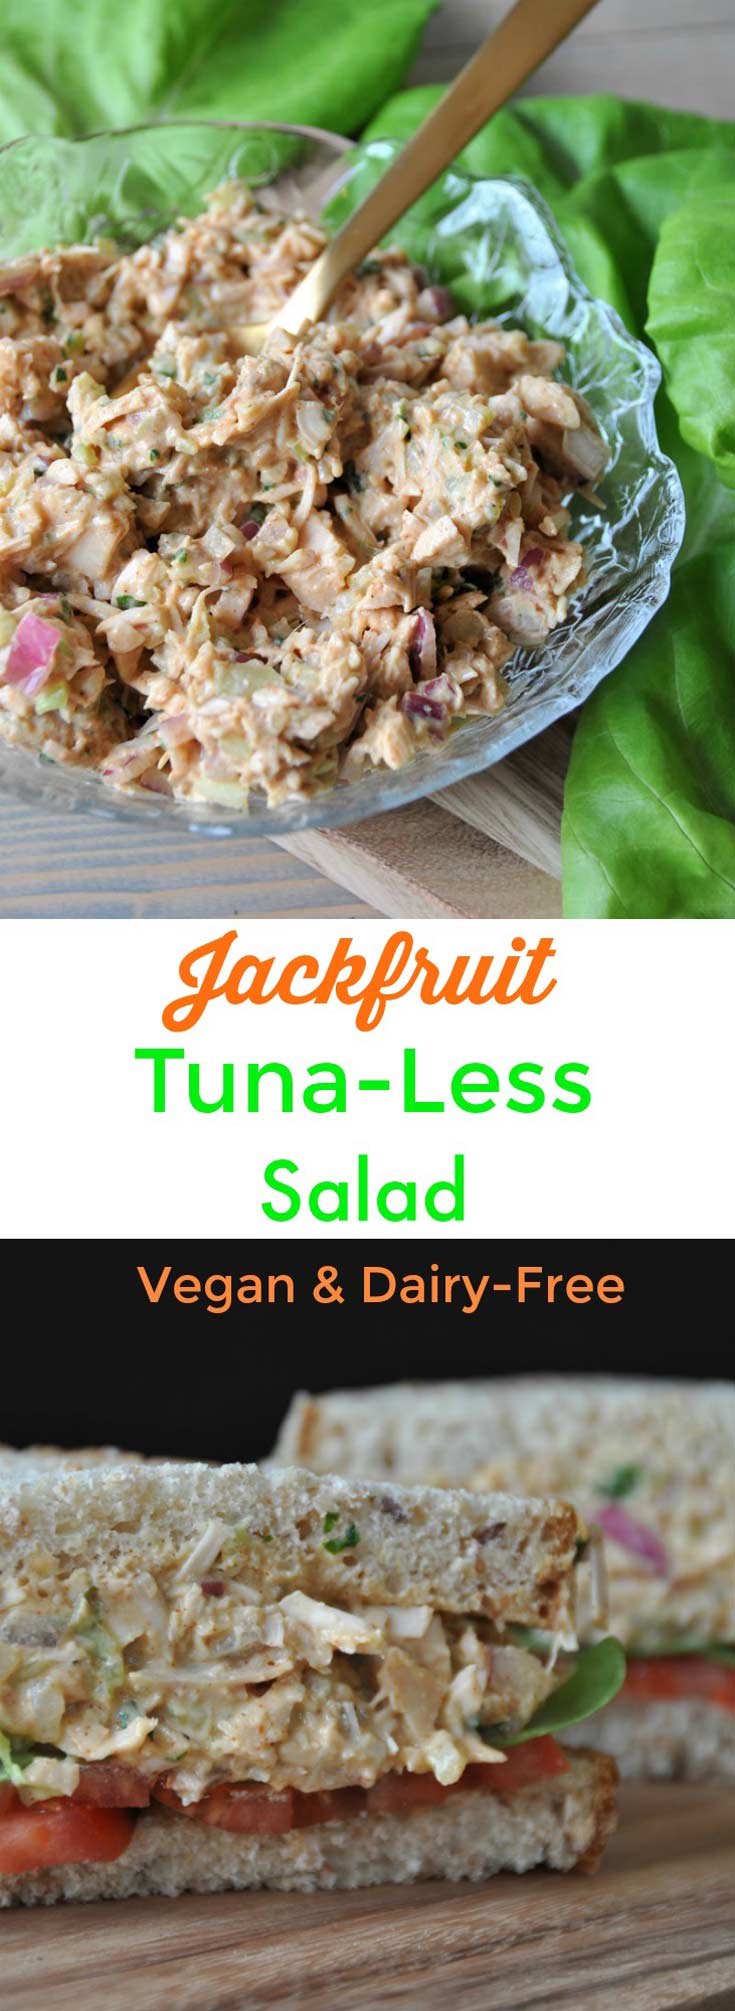 The texture of jackfruit is so much like tuna. This vegan "tuna" salad is healthy, dairy-free, meat-free, and delicious!